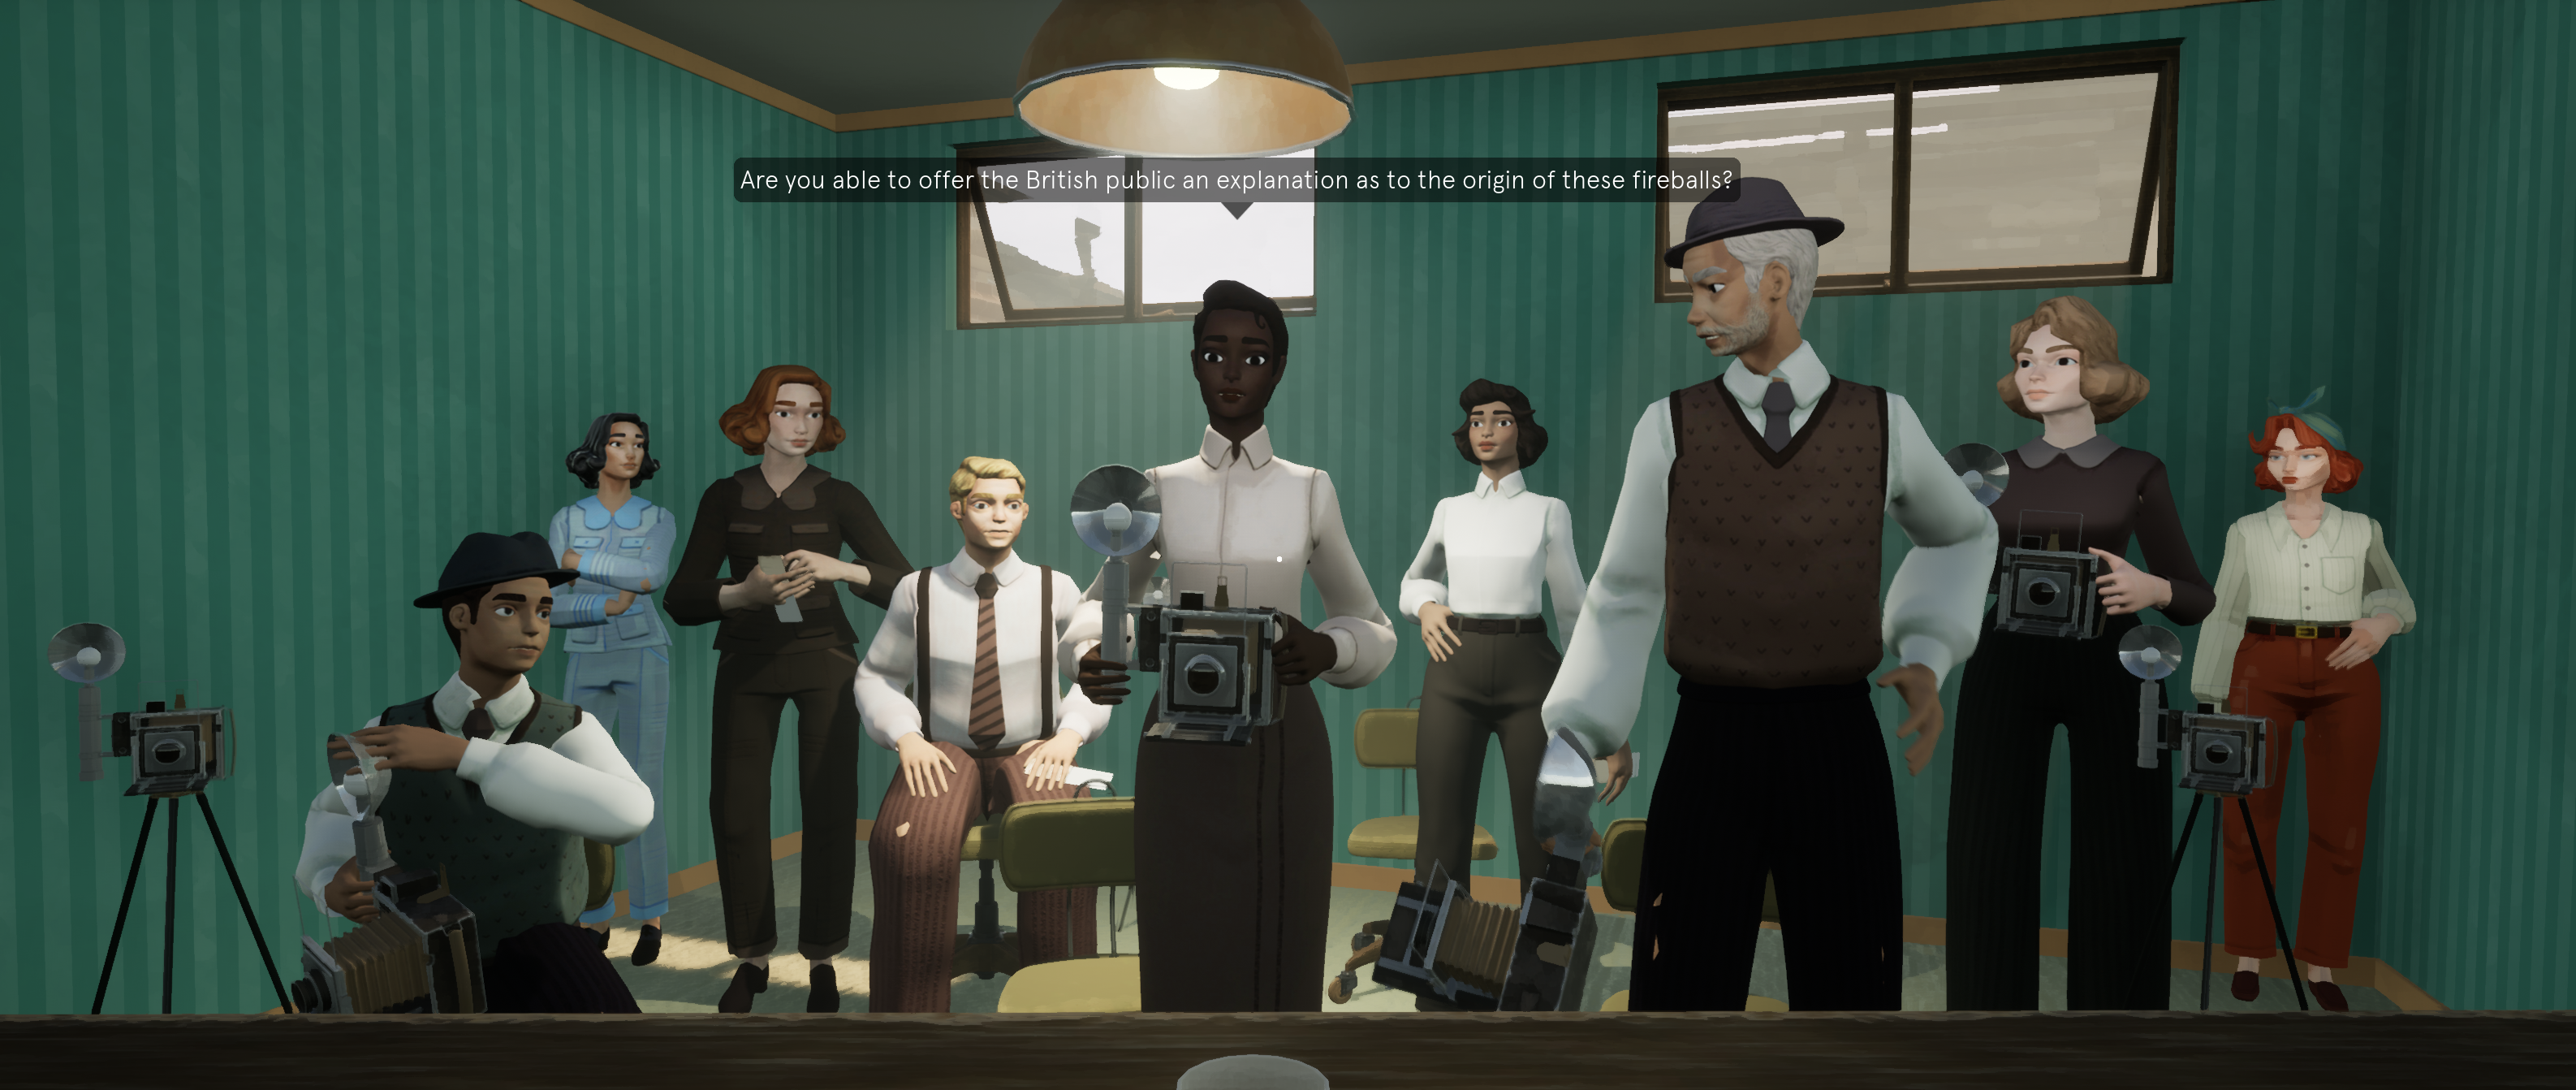 A screenshot of The Kraken Wakes game, with a number of NPCs in an office environment interviewing the player